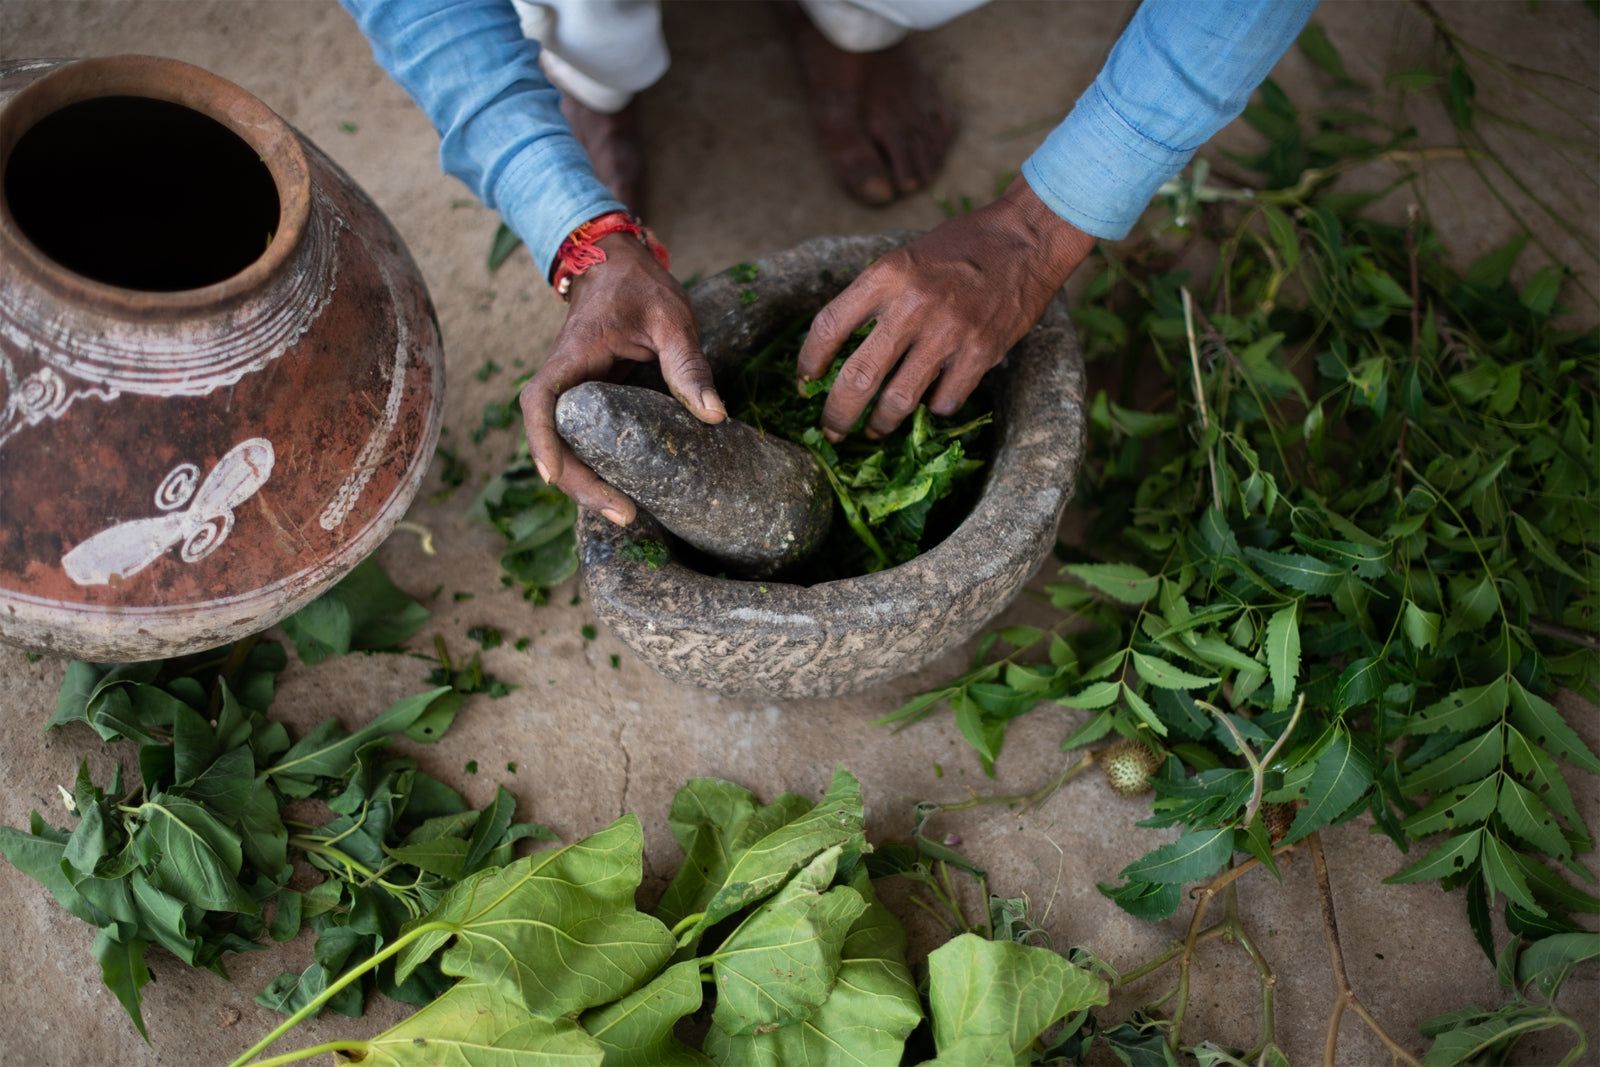 A natural pesticide made from crushing the leaves of five different plants and leaving them to sit in a clay pot for a week. It is then boiled, reduced by half, mixed with water and then sprayed over the fields. Photo: Hashim Badani.